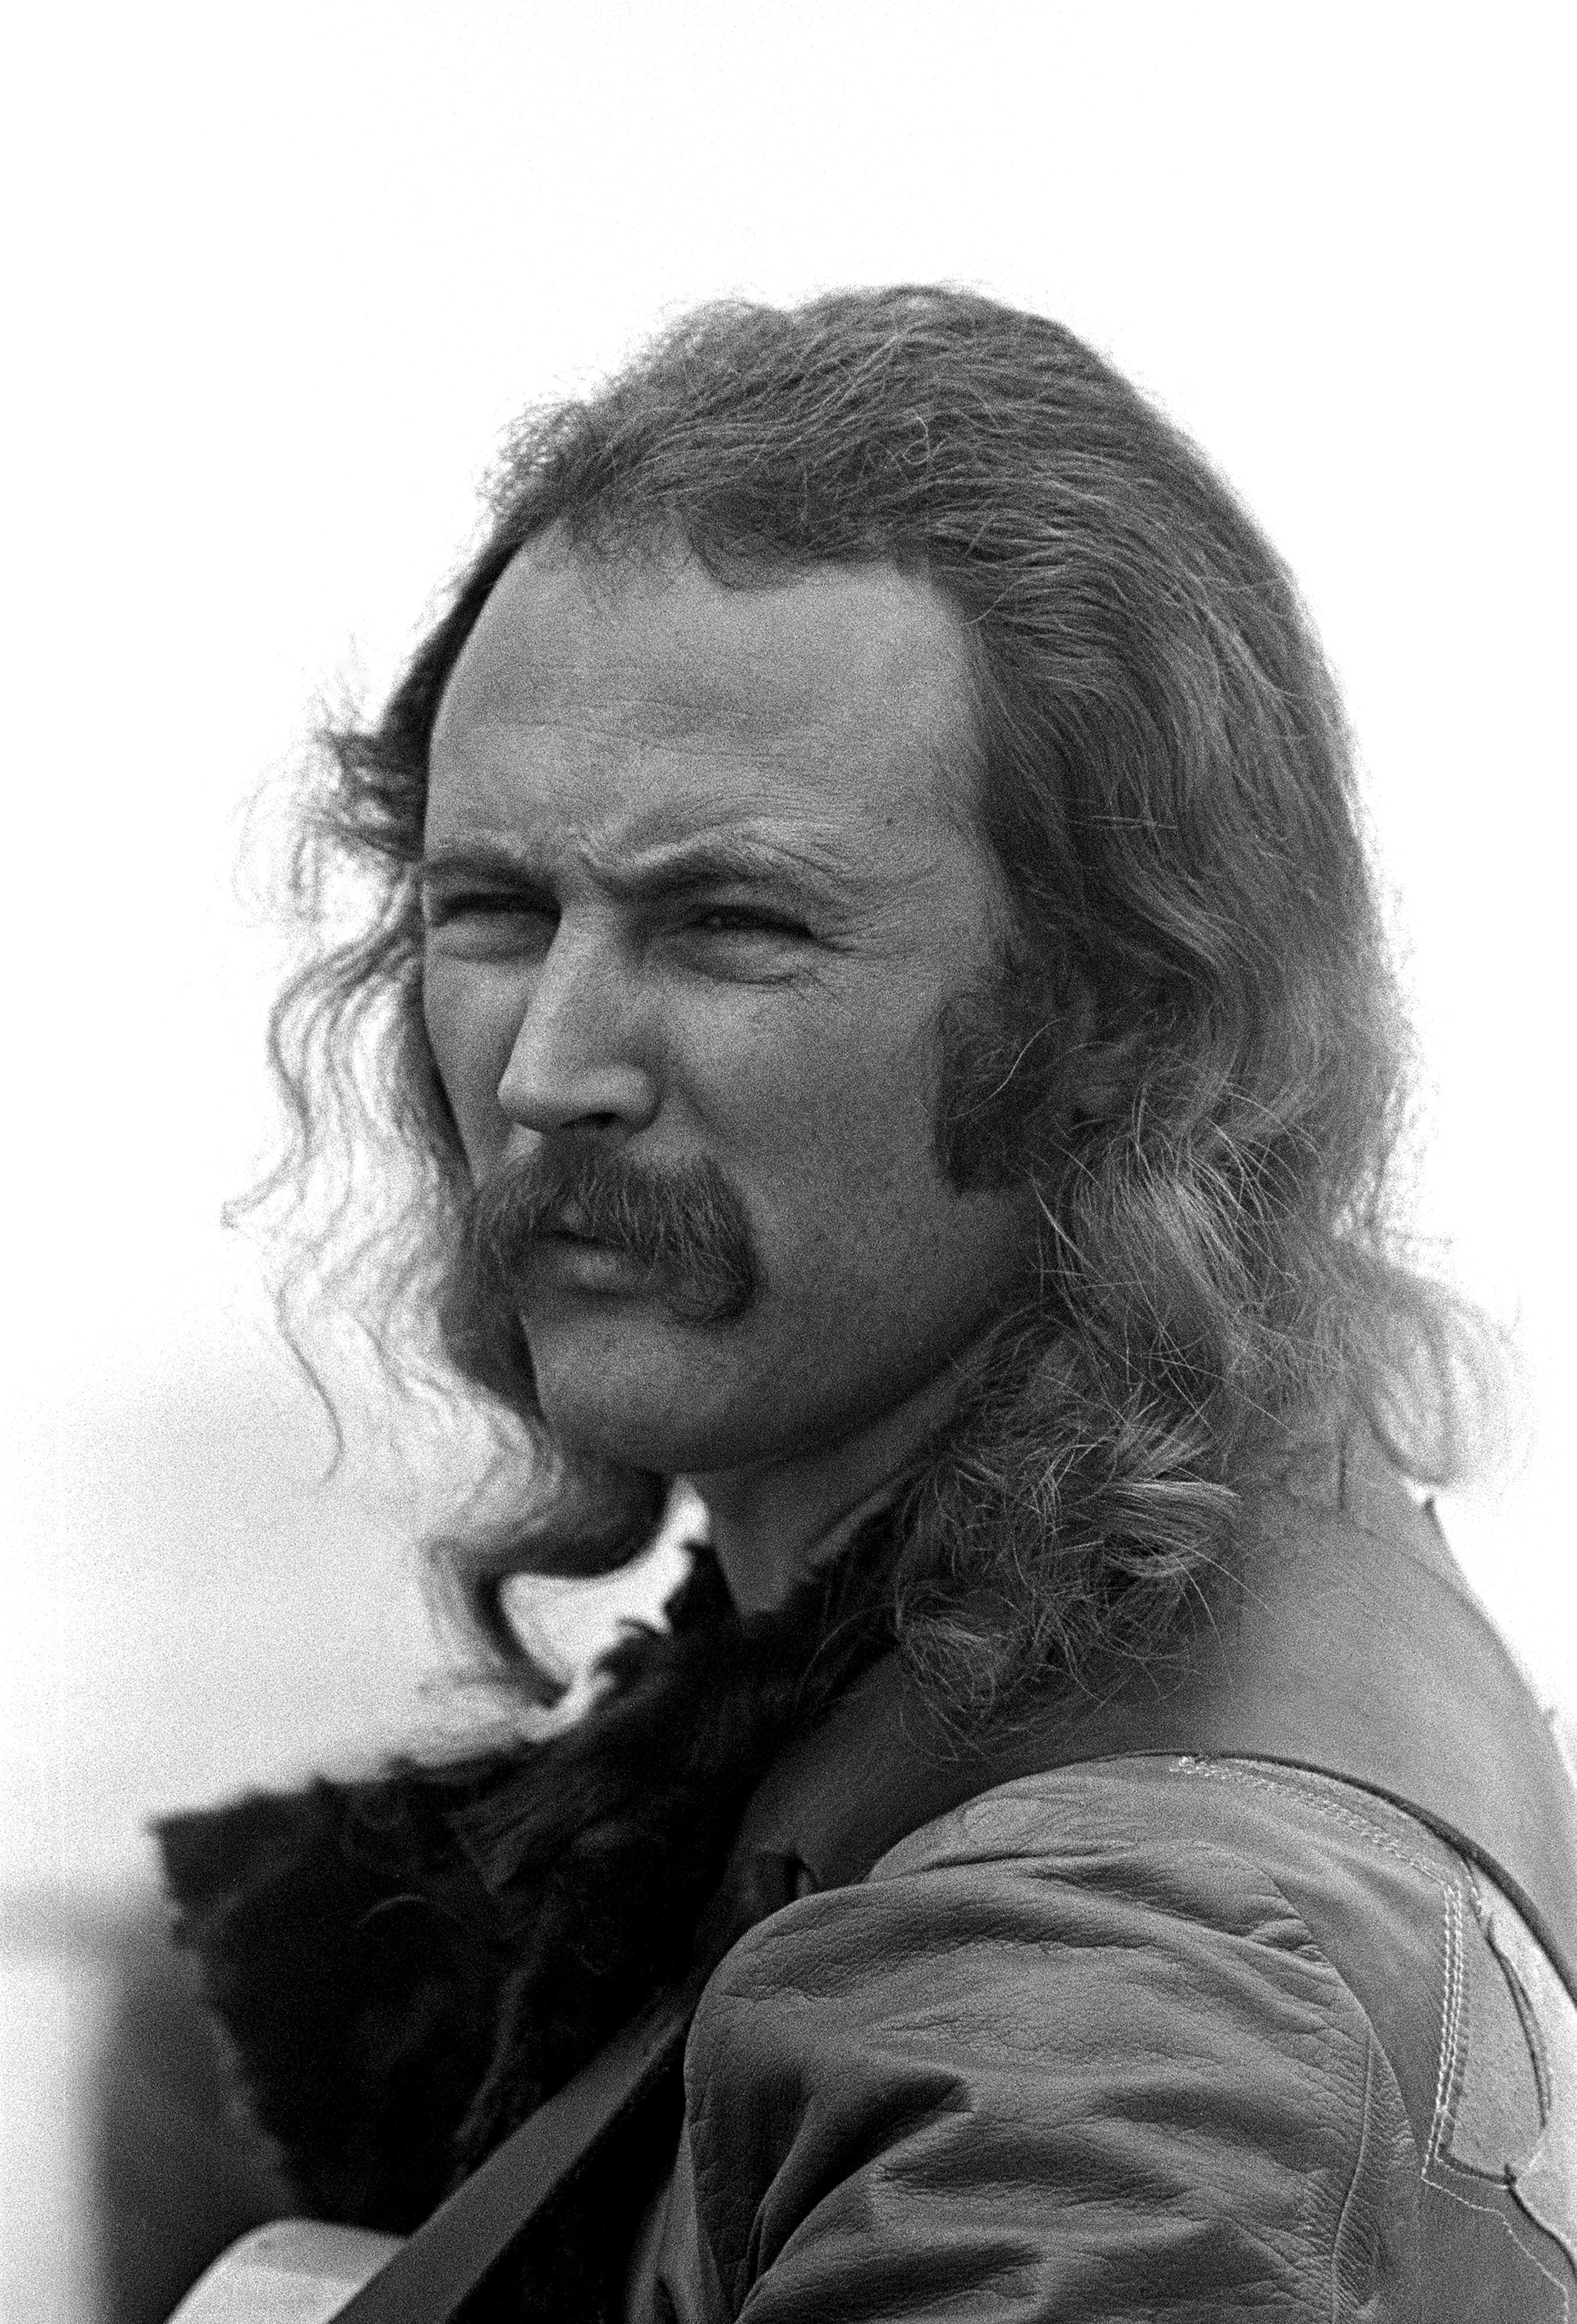 David Crosby at the Big Sur Folk Festival held at the Esalen Institue on September, 15 1969, in Big Sur, California. | Source: Getty Images